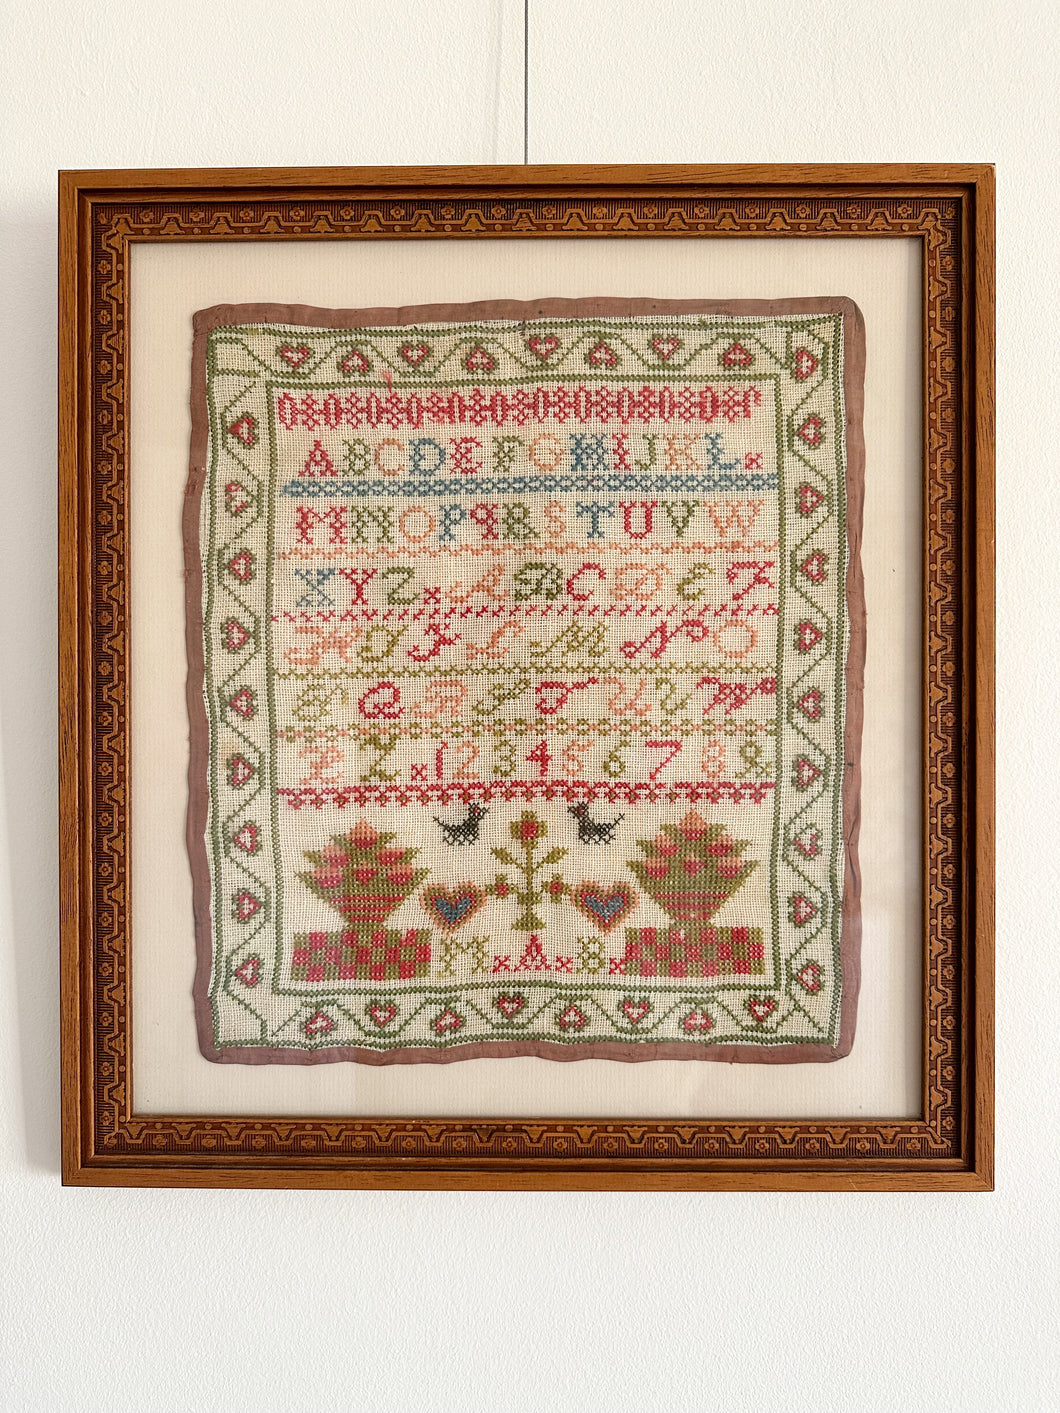 Antique framed alphabet cross stitch embroidery sampler, in blue, pink, green and yellow - Moppet